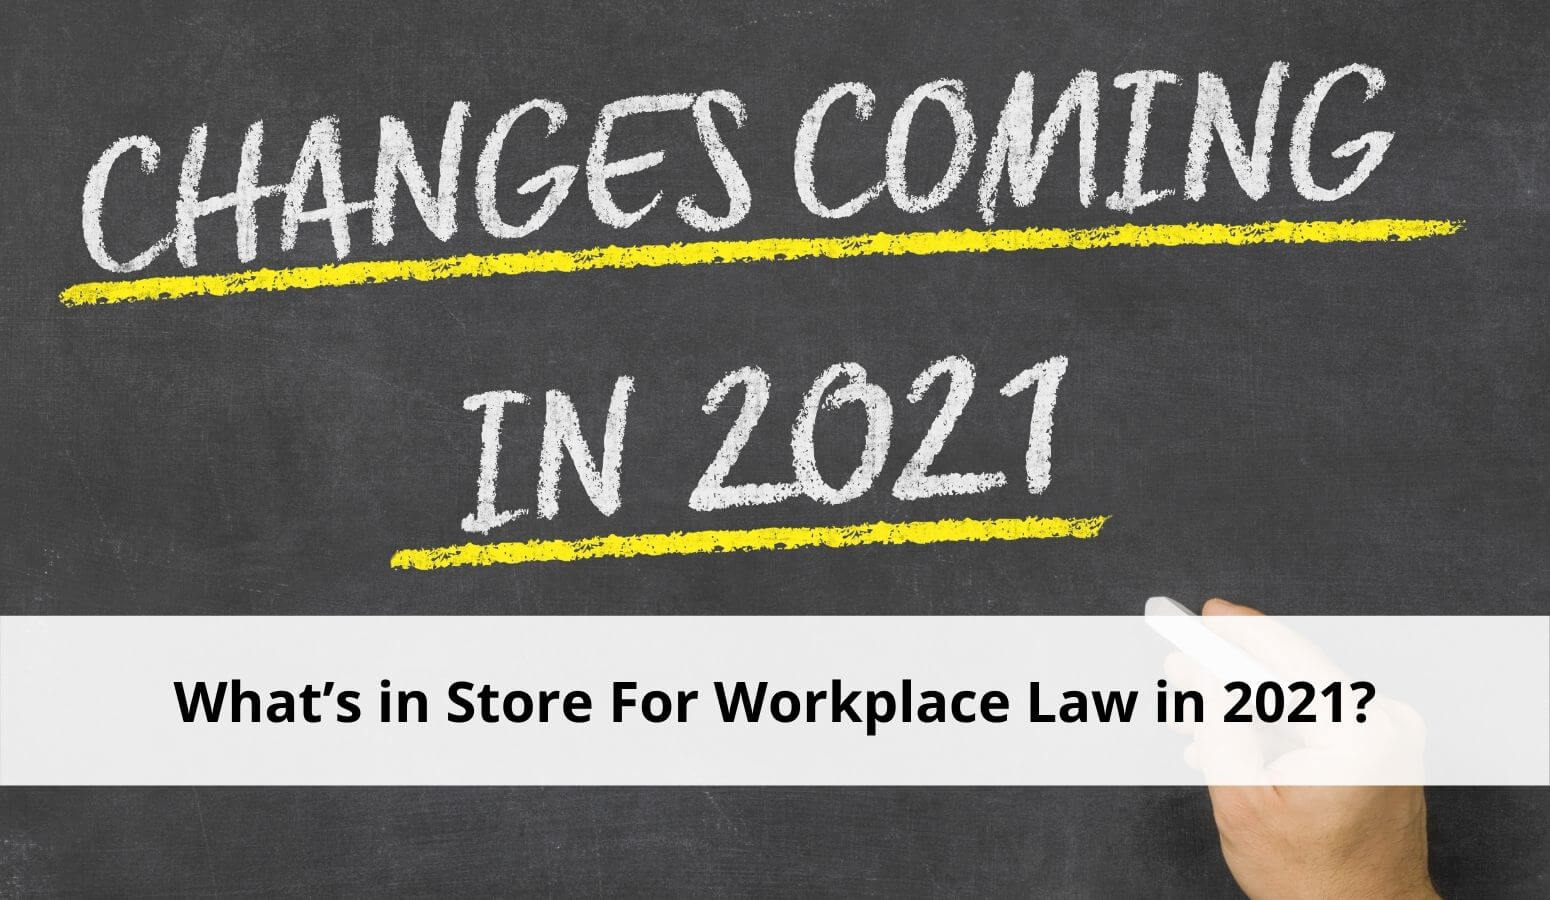 Featured image for “What’s in Store For Workplace Law in 2021?”